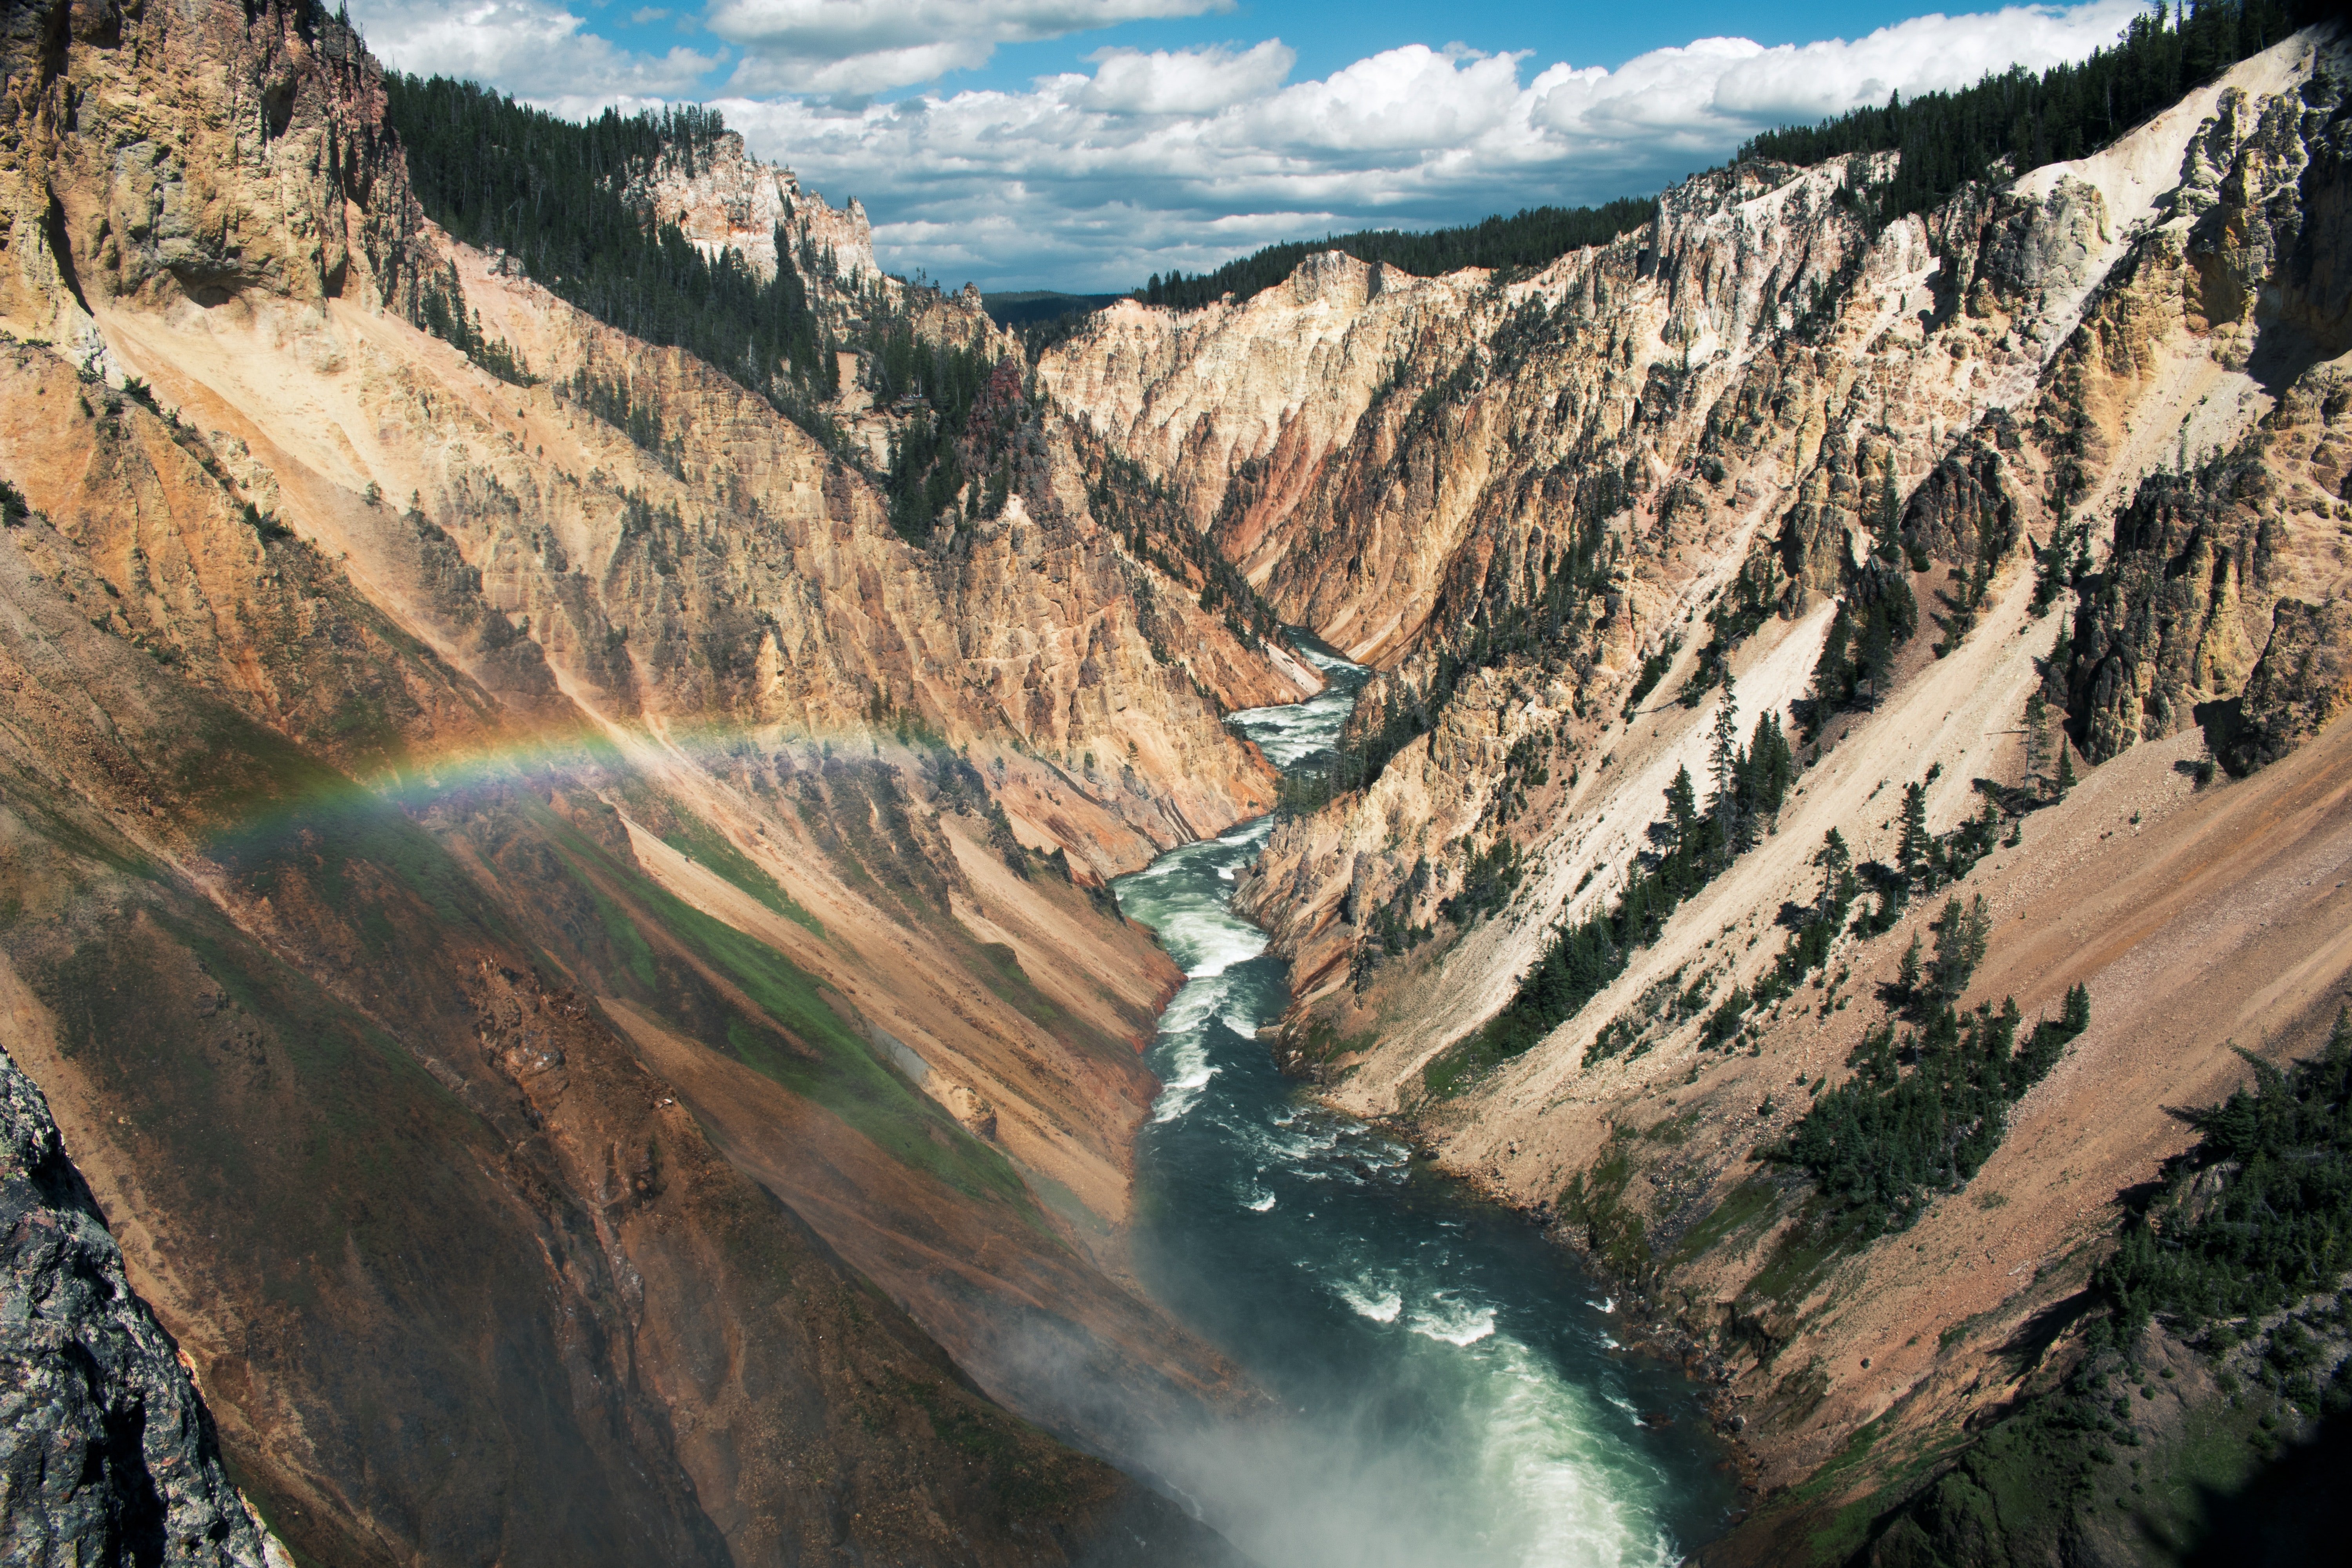 A river in a mountain gorge with a rainbow